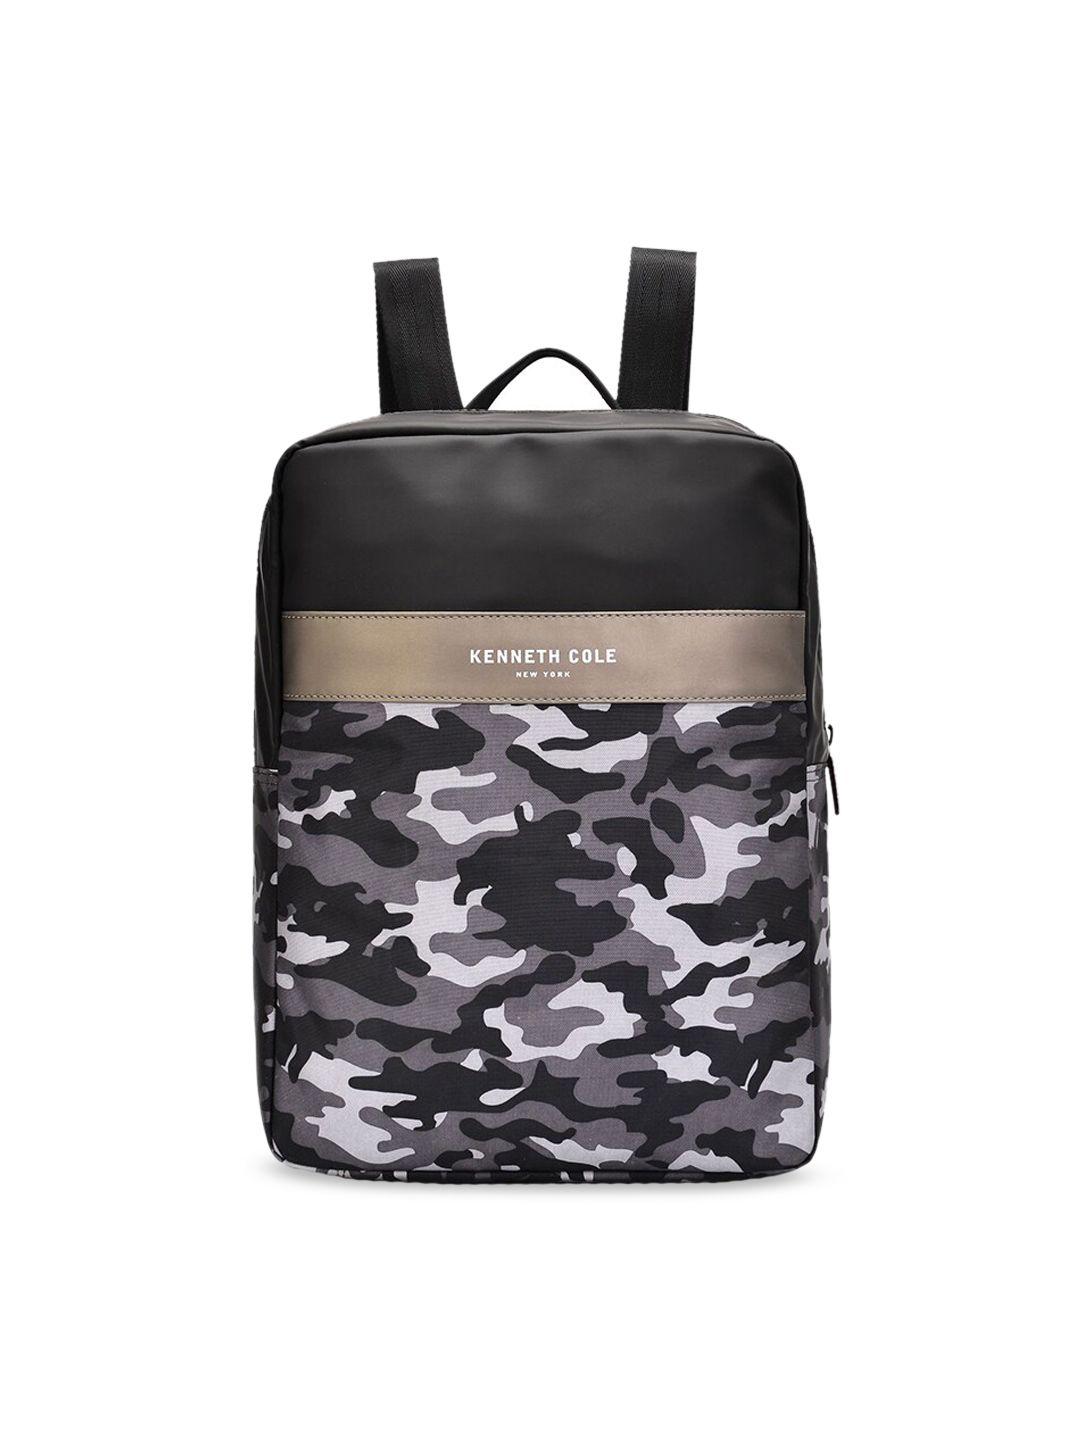 kenneth-cole-women-black-&-grey-camouflage-printed-backpack